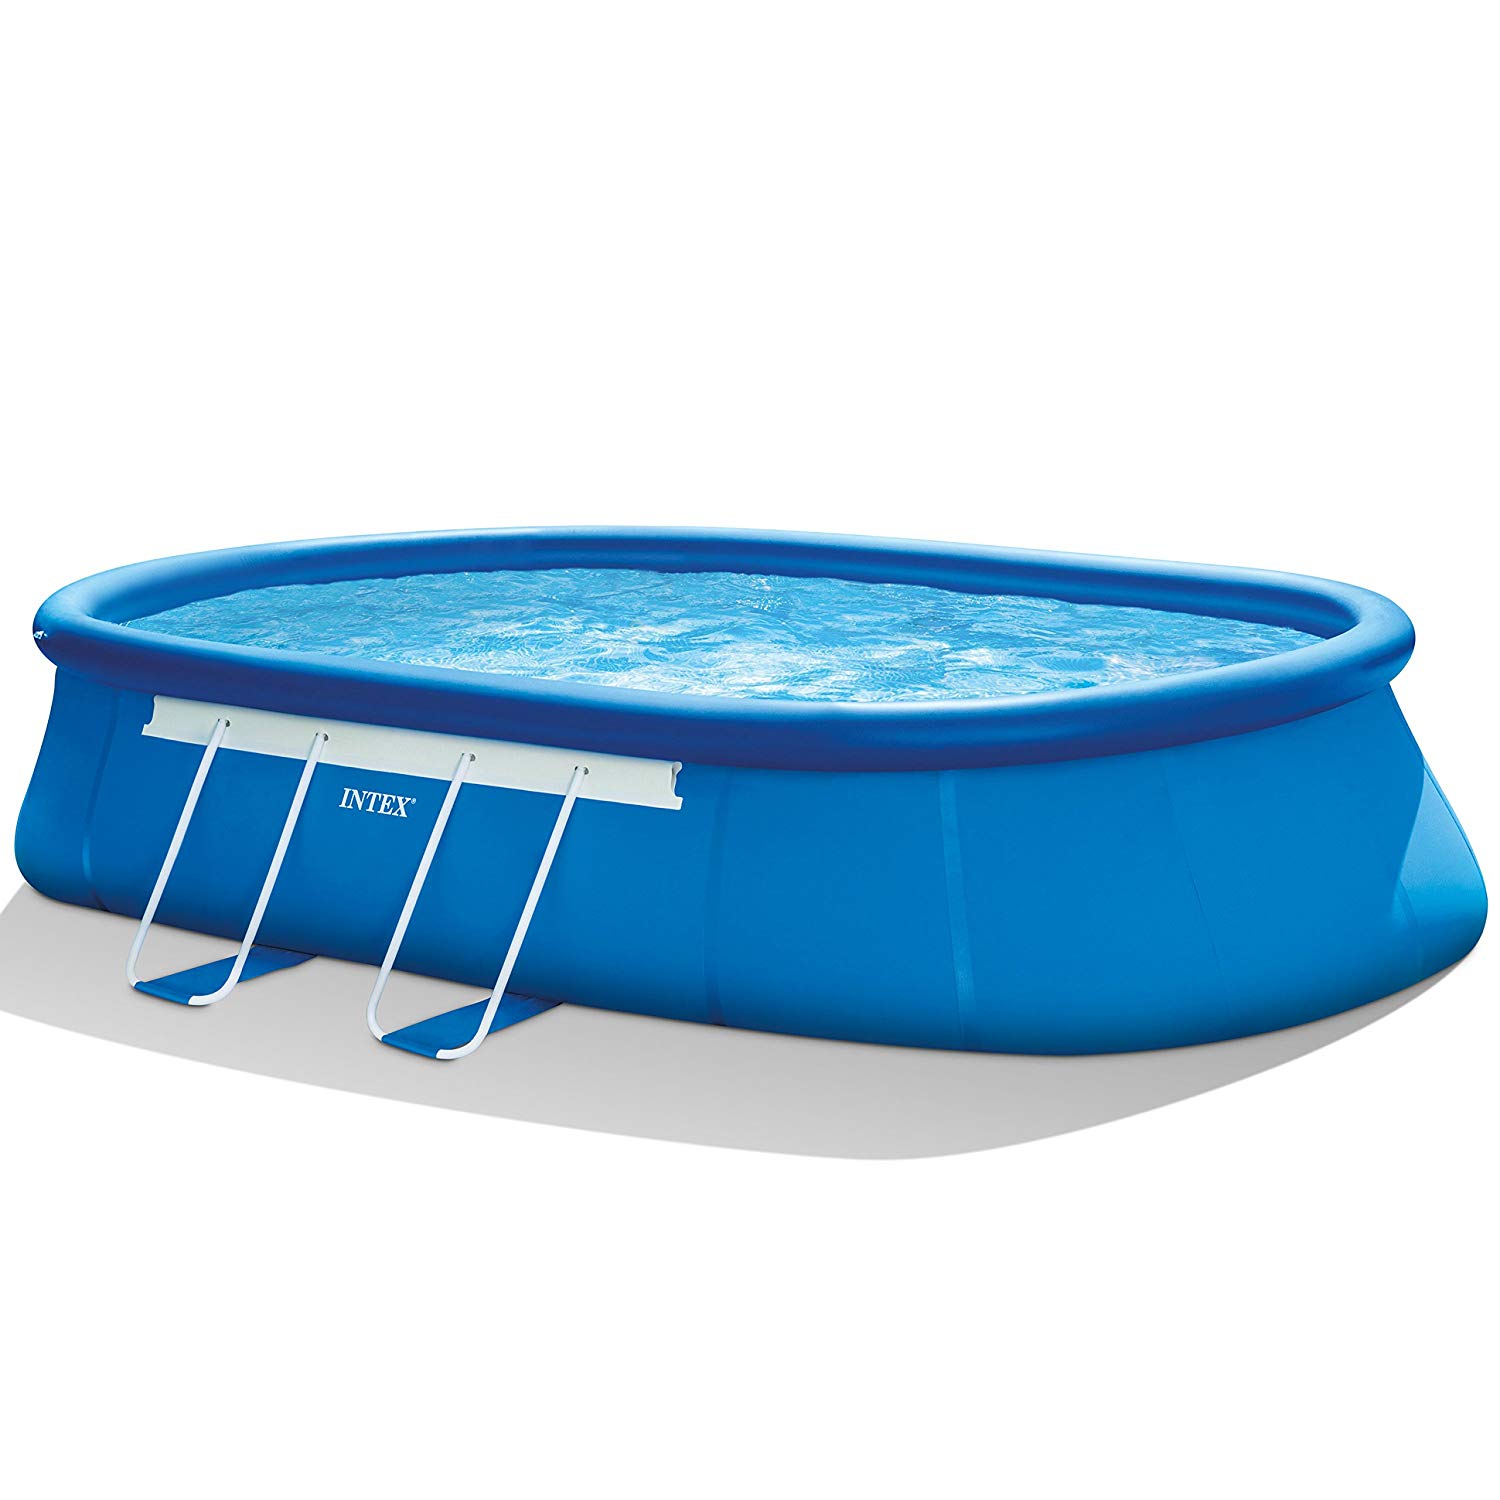 Intex Oval Frame Best Above Ground Pools